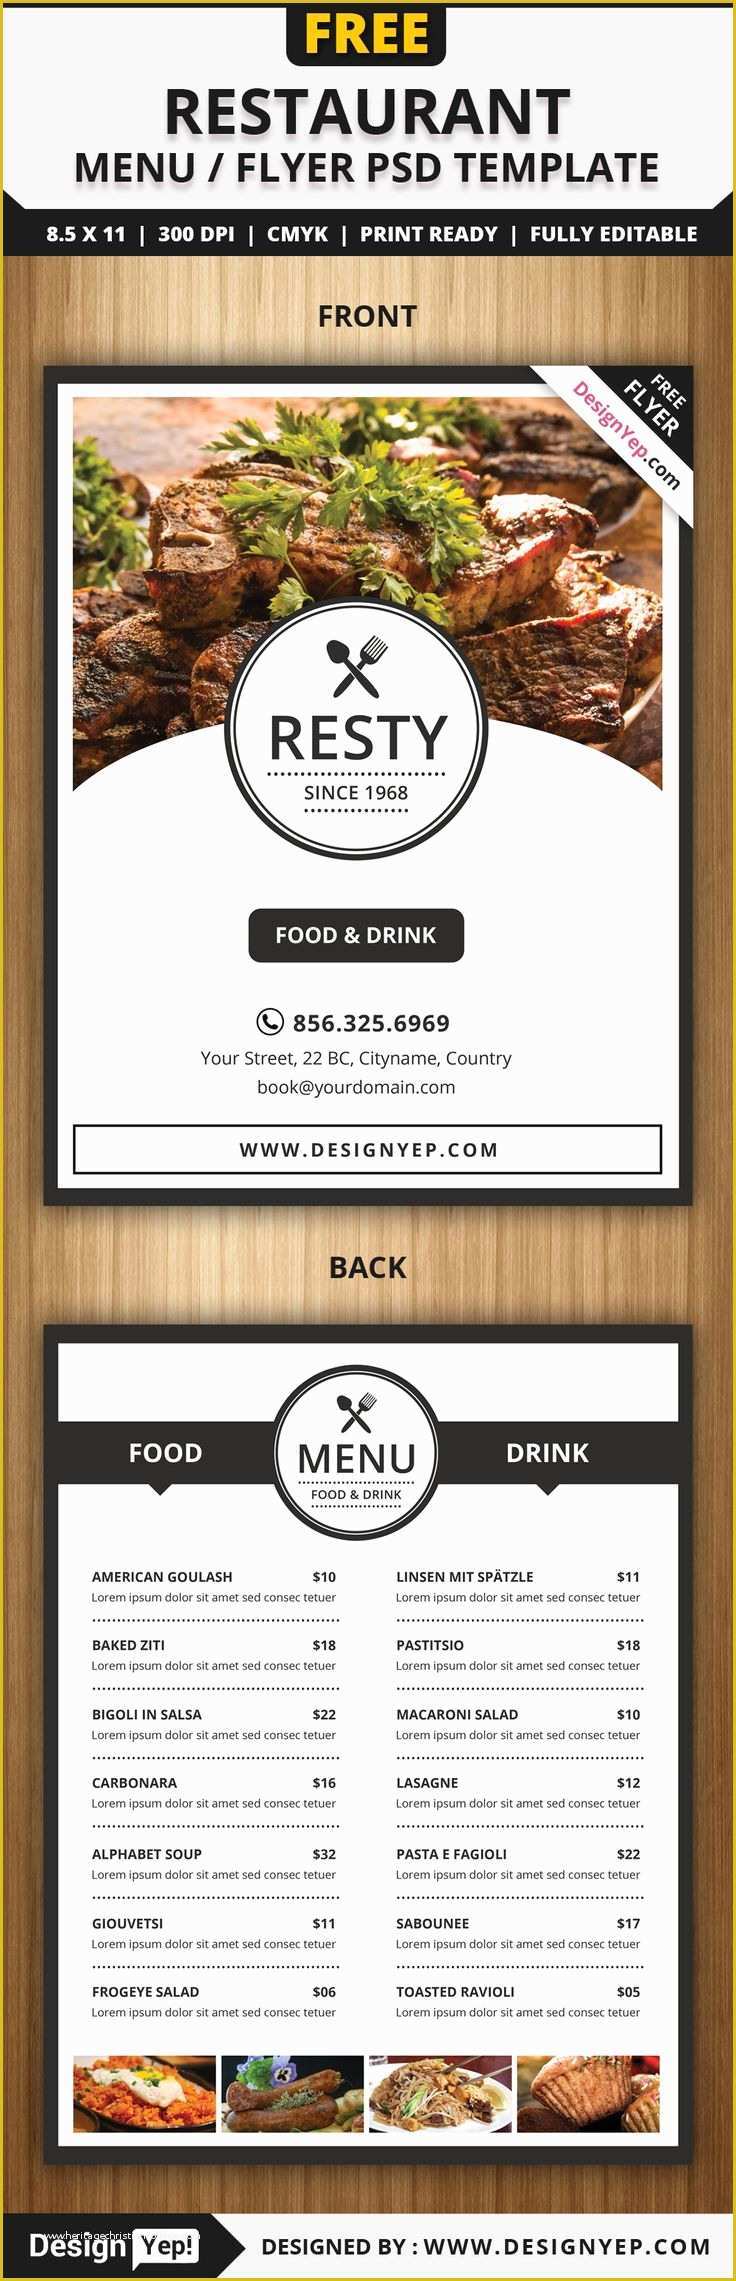 Free Like Us On Facebook Flyer Template Of Best 25 Greens Restaurant Ideas Only On Pinterest